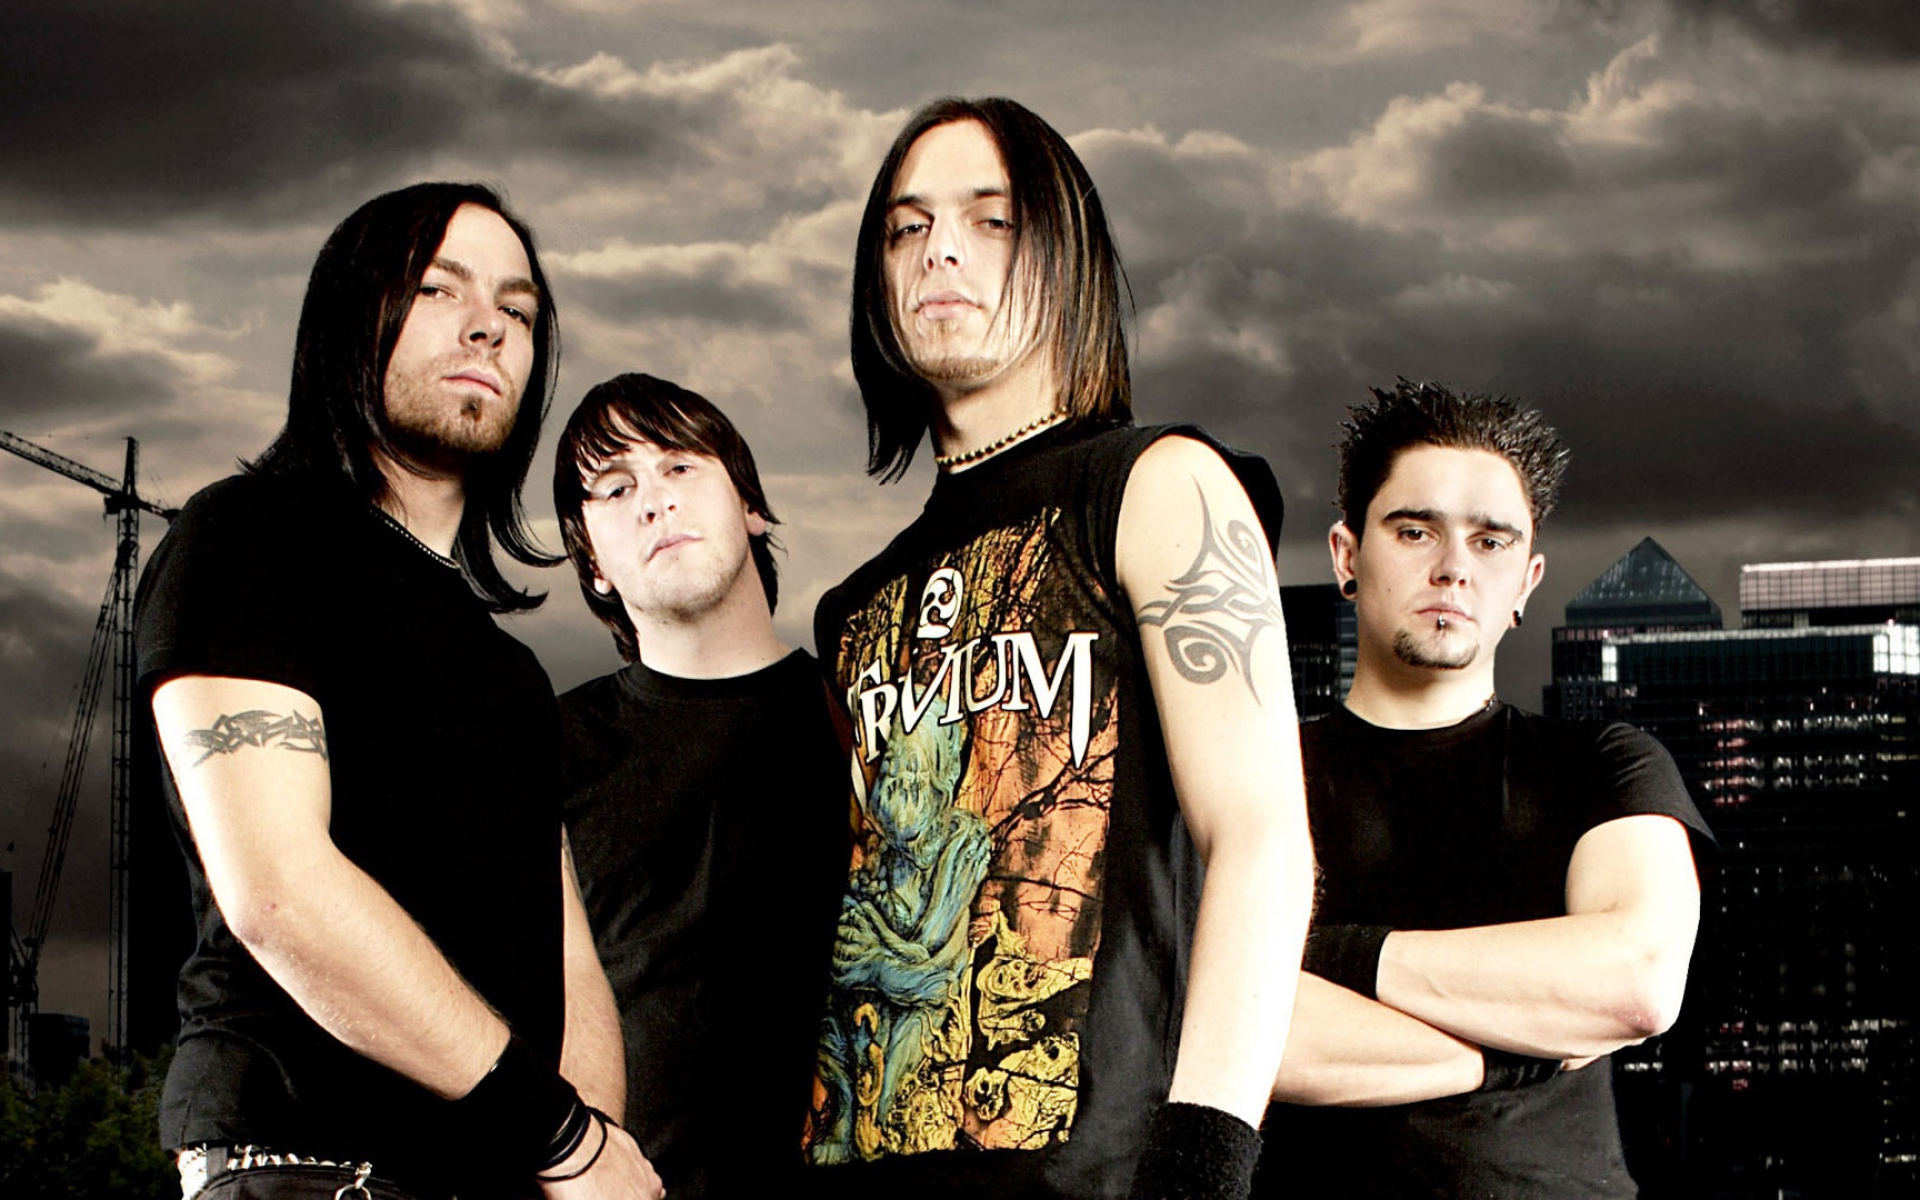 Session fora. Группа Bullet for my Valentine. Группа Bullet for my Valentine 2005. Группа Bullet for my Valentine 2021.